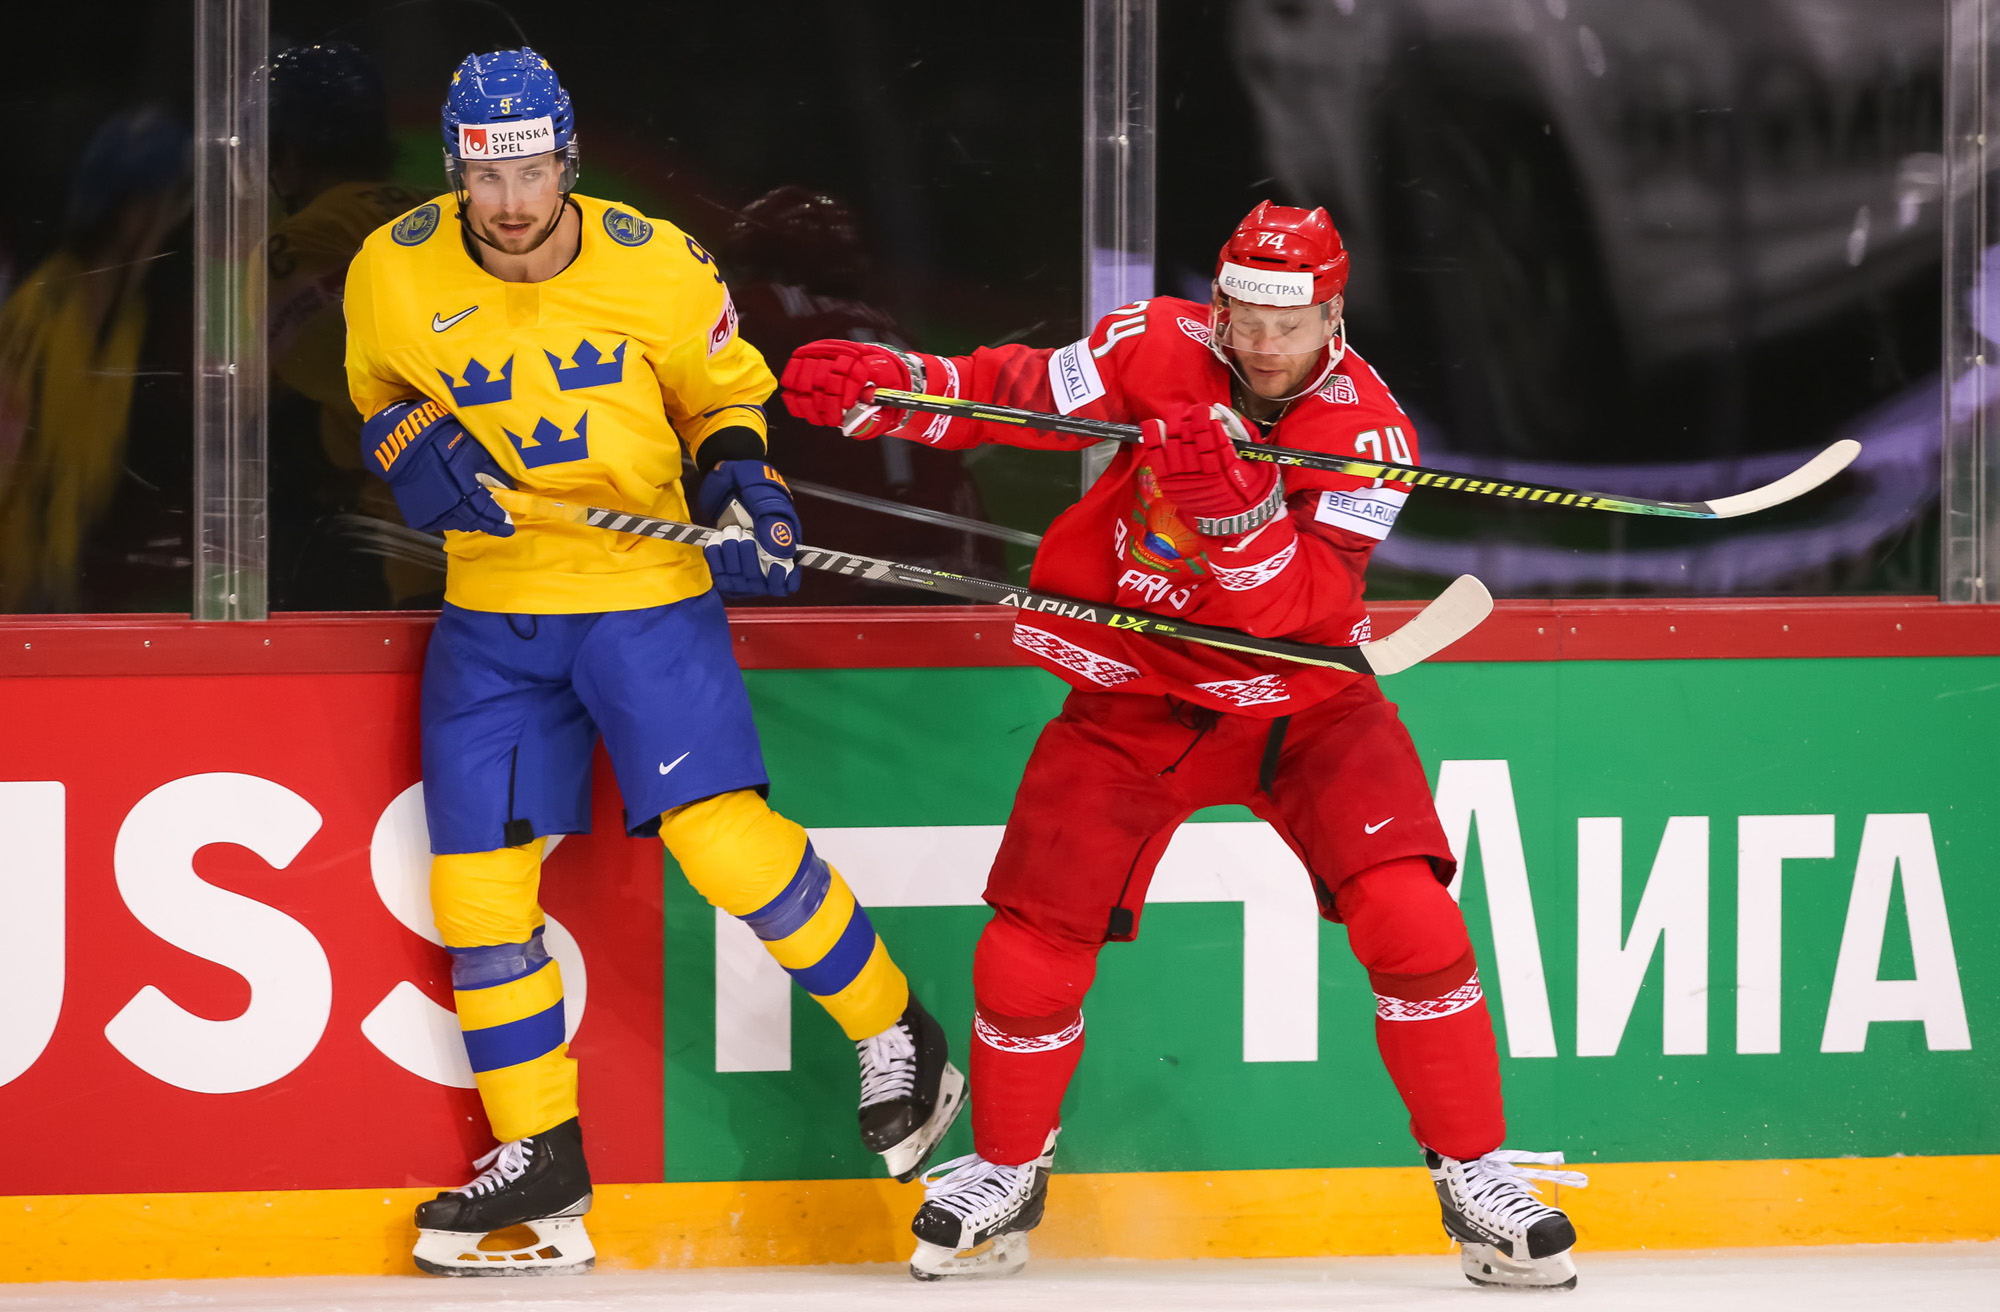 Riga, Olympic Sports Centre, Denmark. 28th May, 2021. vs Belarus (2021 IIHF  Ice Hockey World Championship), #13 Mikhail Stefanovich (Belarus) scores  and celebrates with #17 Yegor Sharangovich (Belarus) and #12 Alexei Protas (